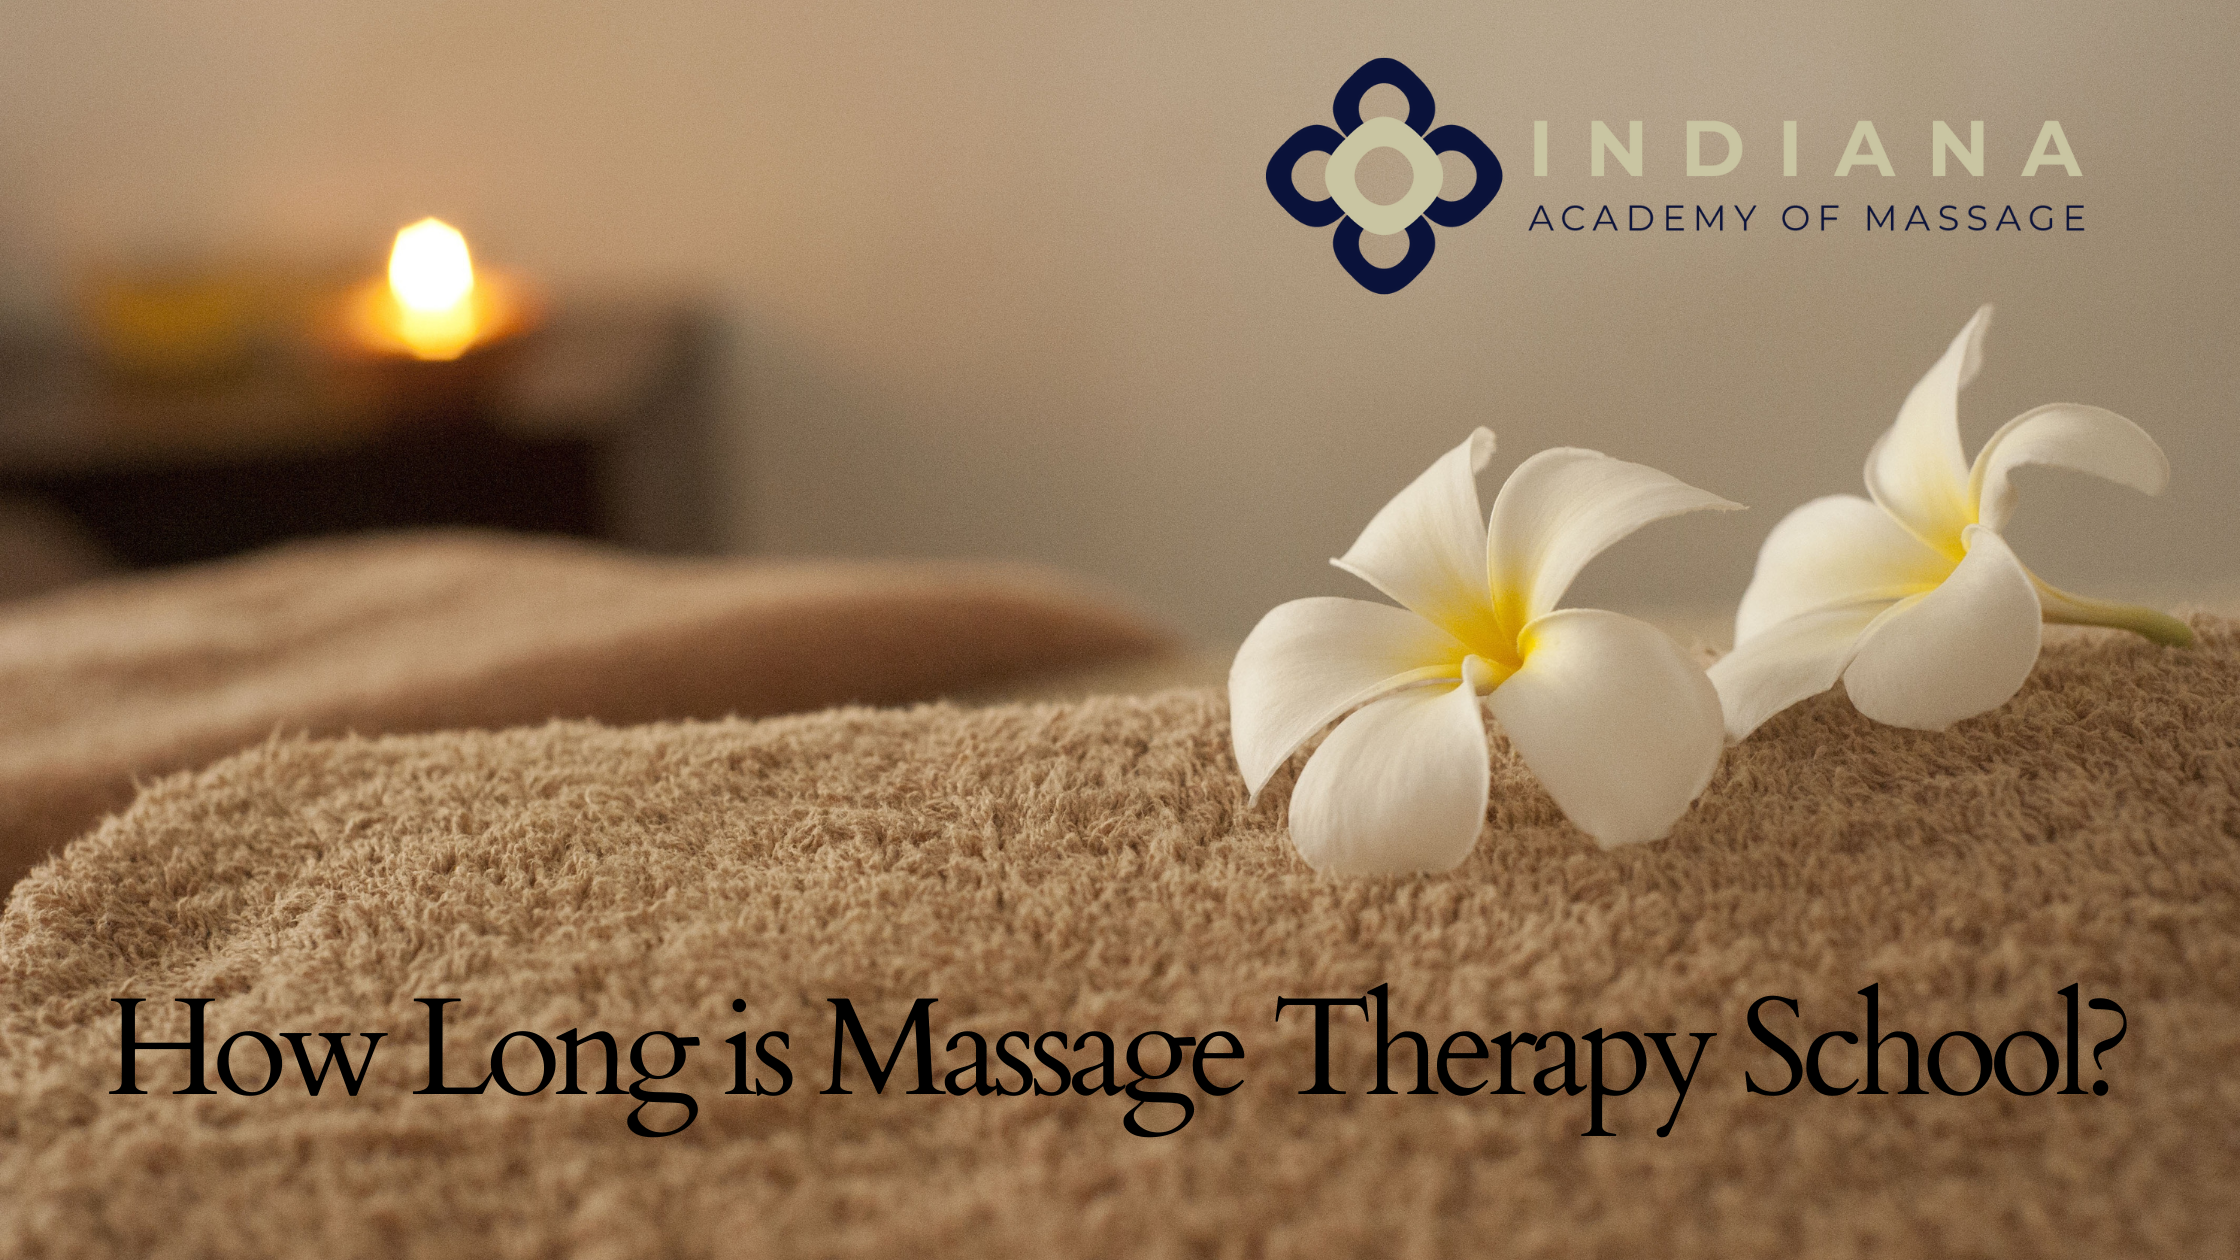 How Long is Massage Therapy School?